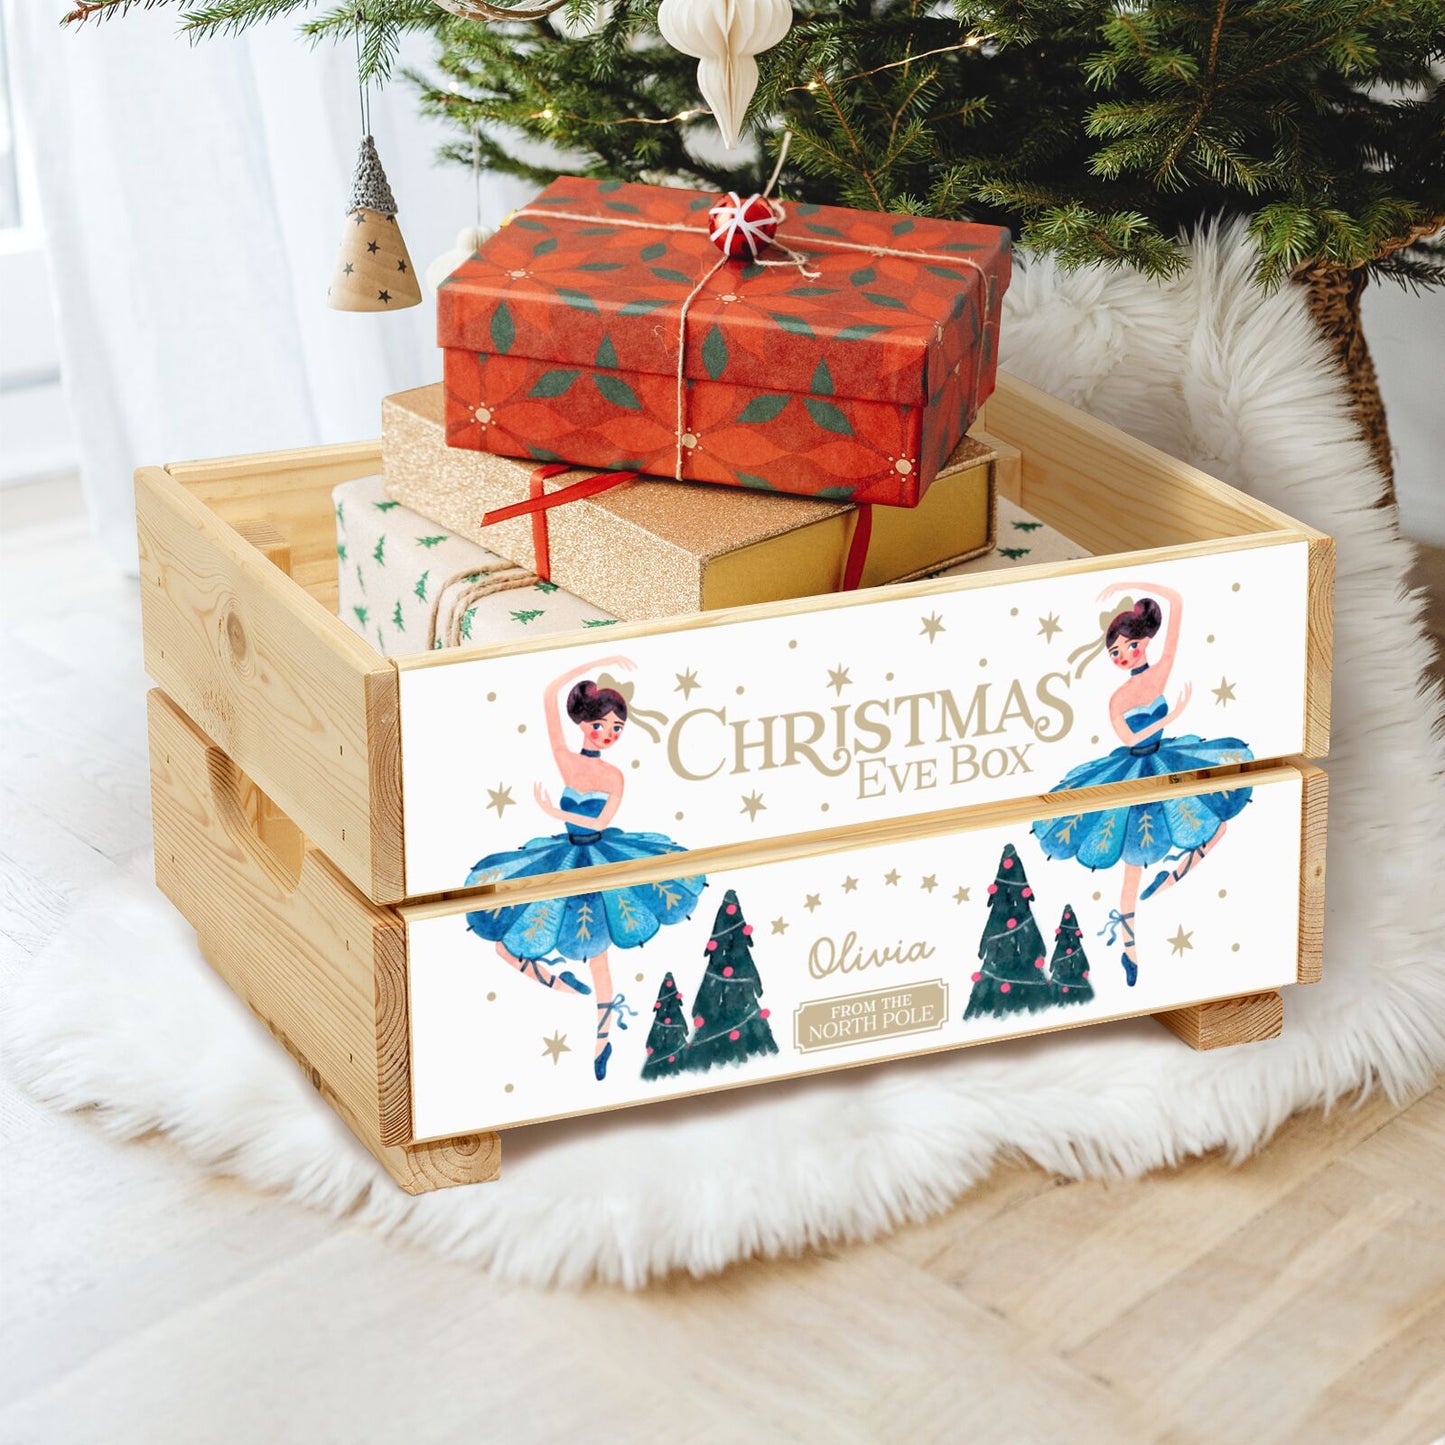 Christmas Dancing Ballerina Christmas Eve Crate Box in Cosy room